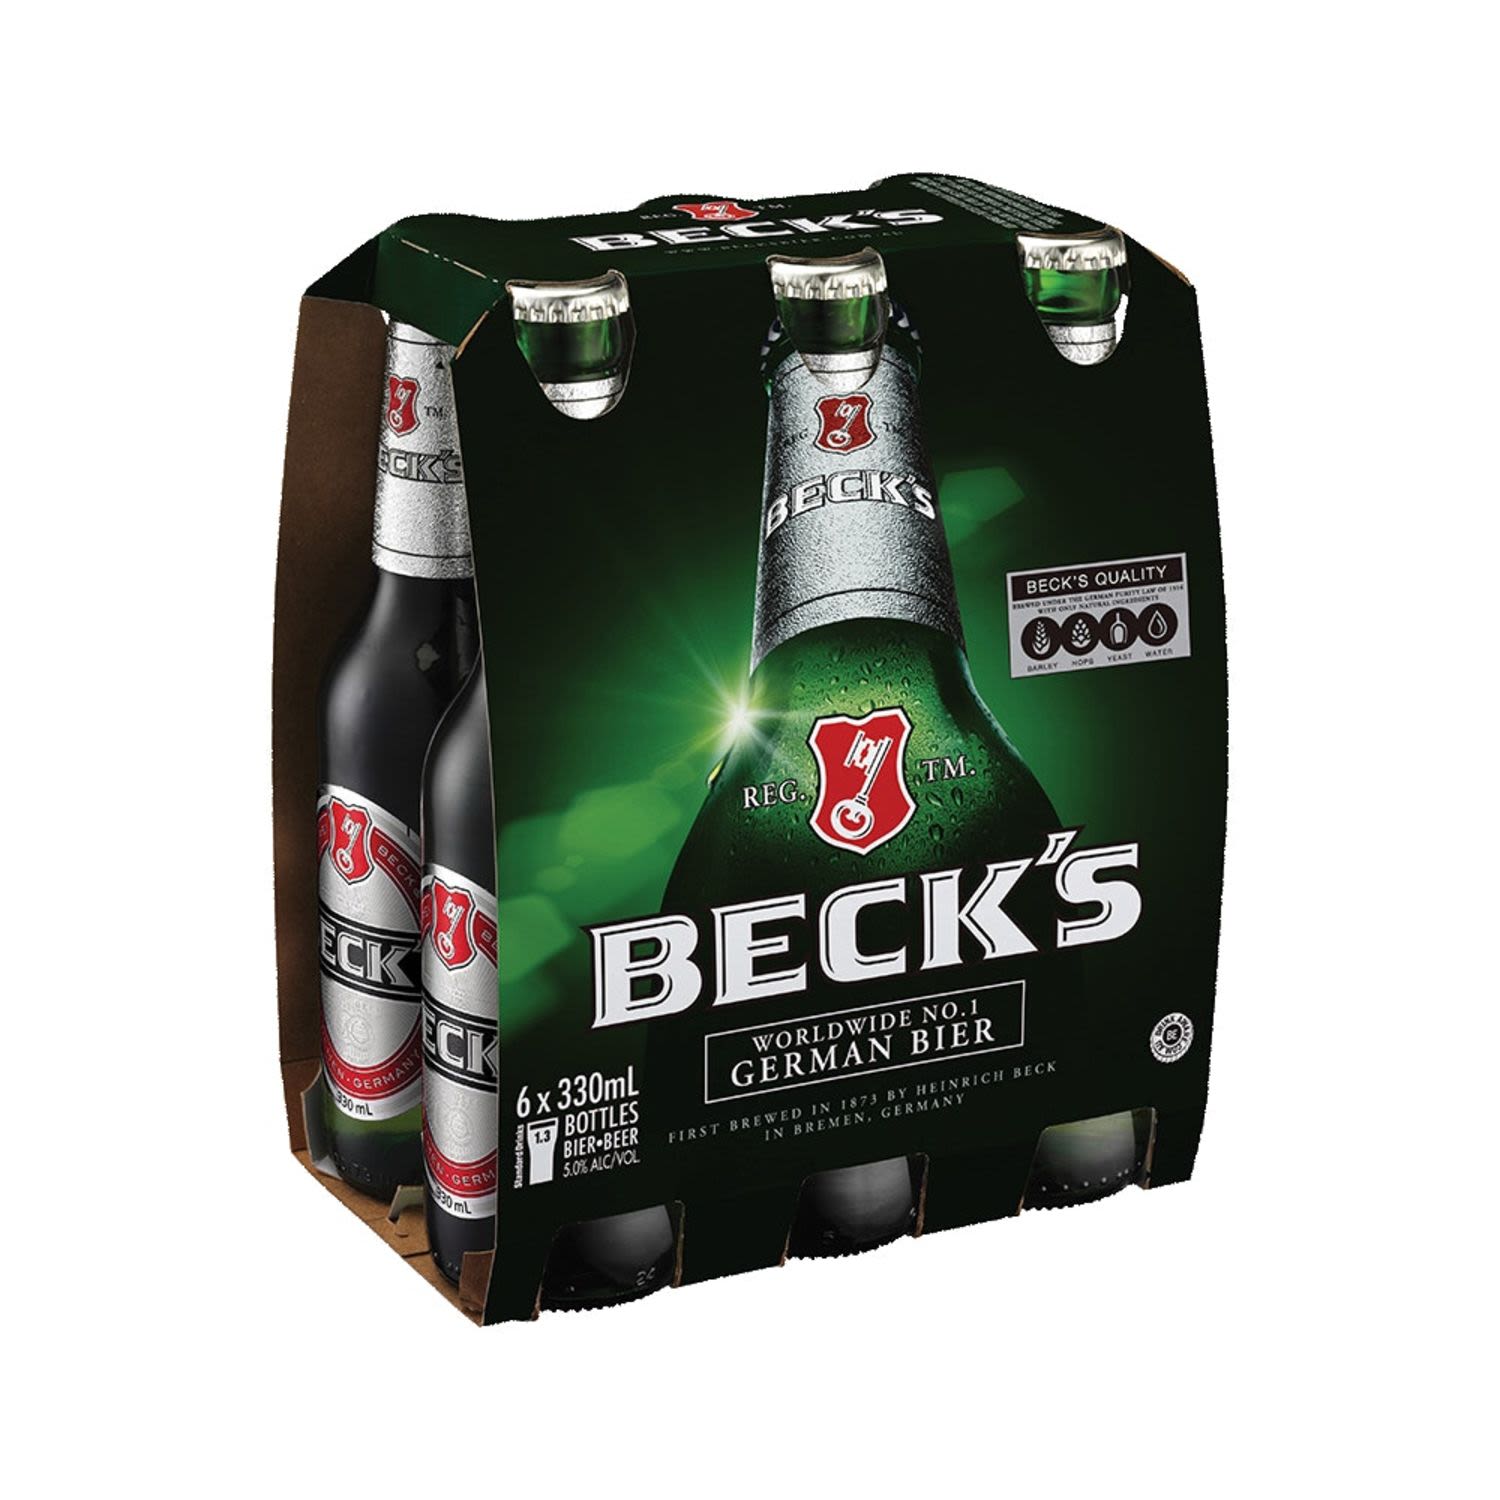 Beck's is a full-flavoured lager with a distinctive European malt taste. Known for it's refreshing and vibrant palate, a style that dates back many centuries. Beck's is best enjoyed with great friends and warm afternoons.<br /> <br />Alcohol Volume: 5.00%<br /><br />Pack Format: 6 Pack<br /><br />Standard Drinks: 1.3</br /><br />Pack Type: Bottle<br /><br />Country of Origin: Germany<br />